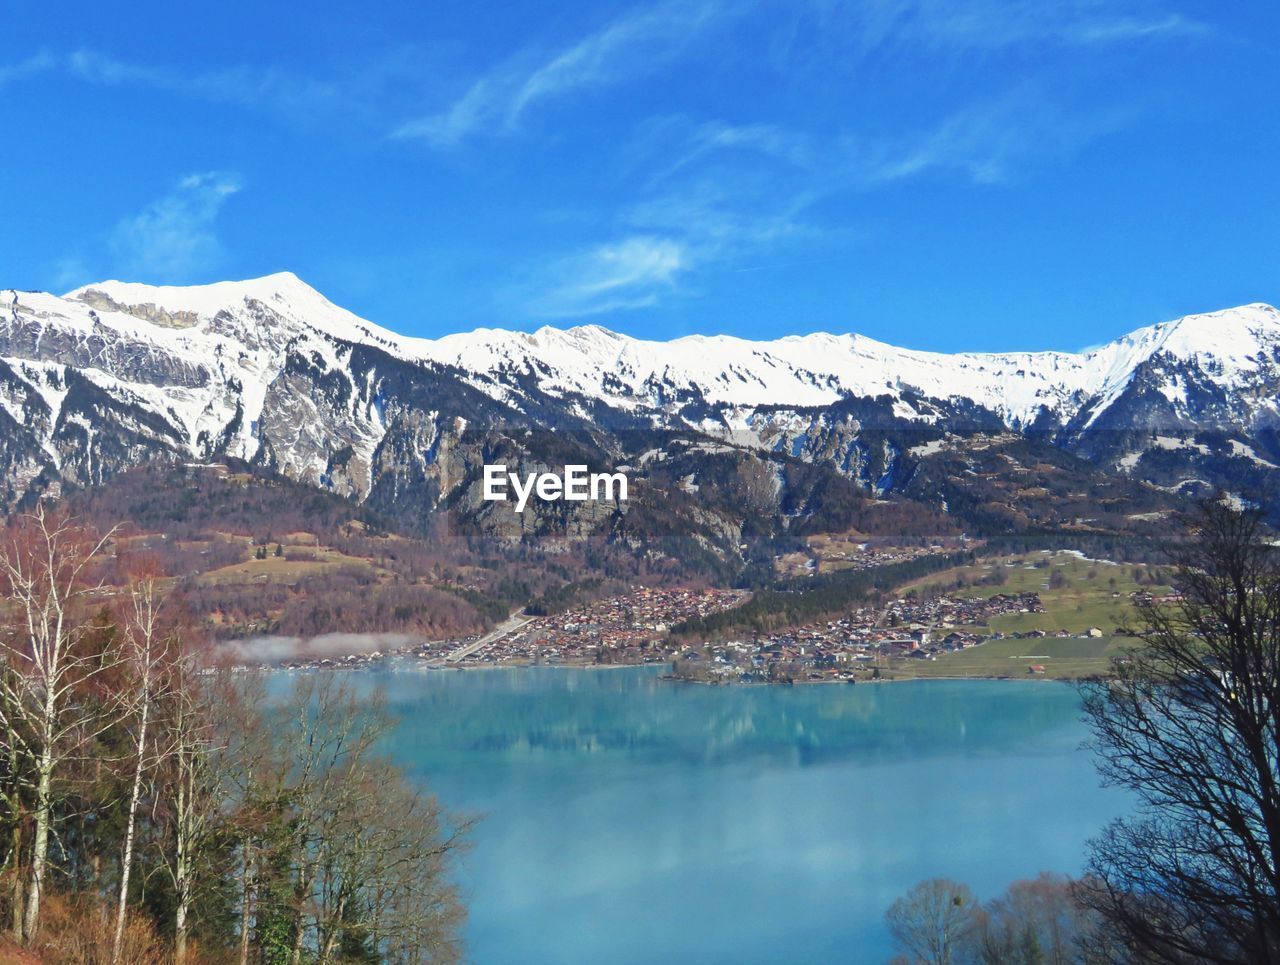 SCENIC VIEW OF LAKE BY SNOWCAPPED MOUNTAIN AGAINST SKY